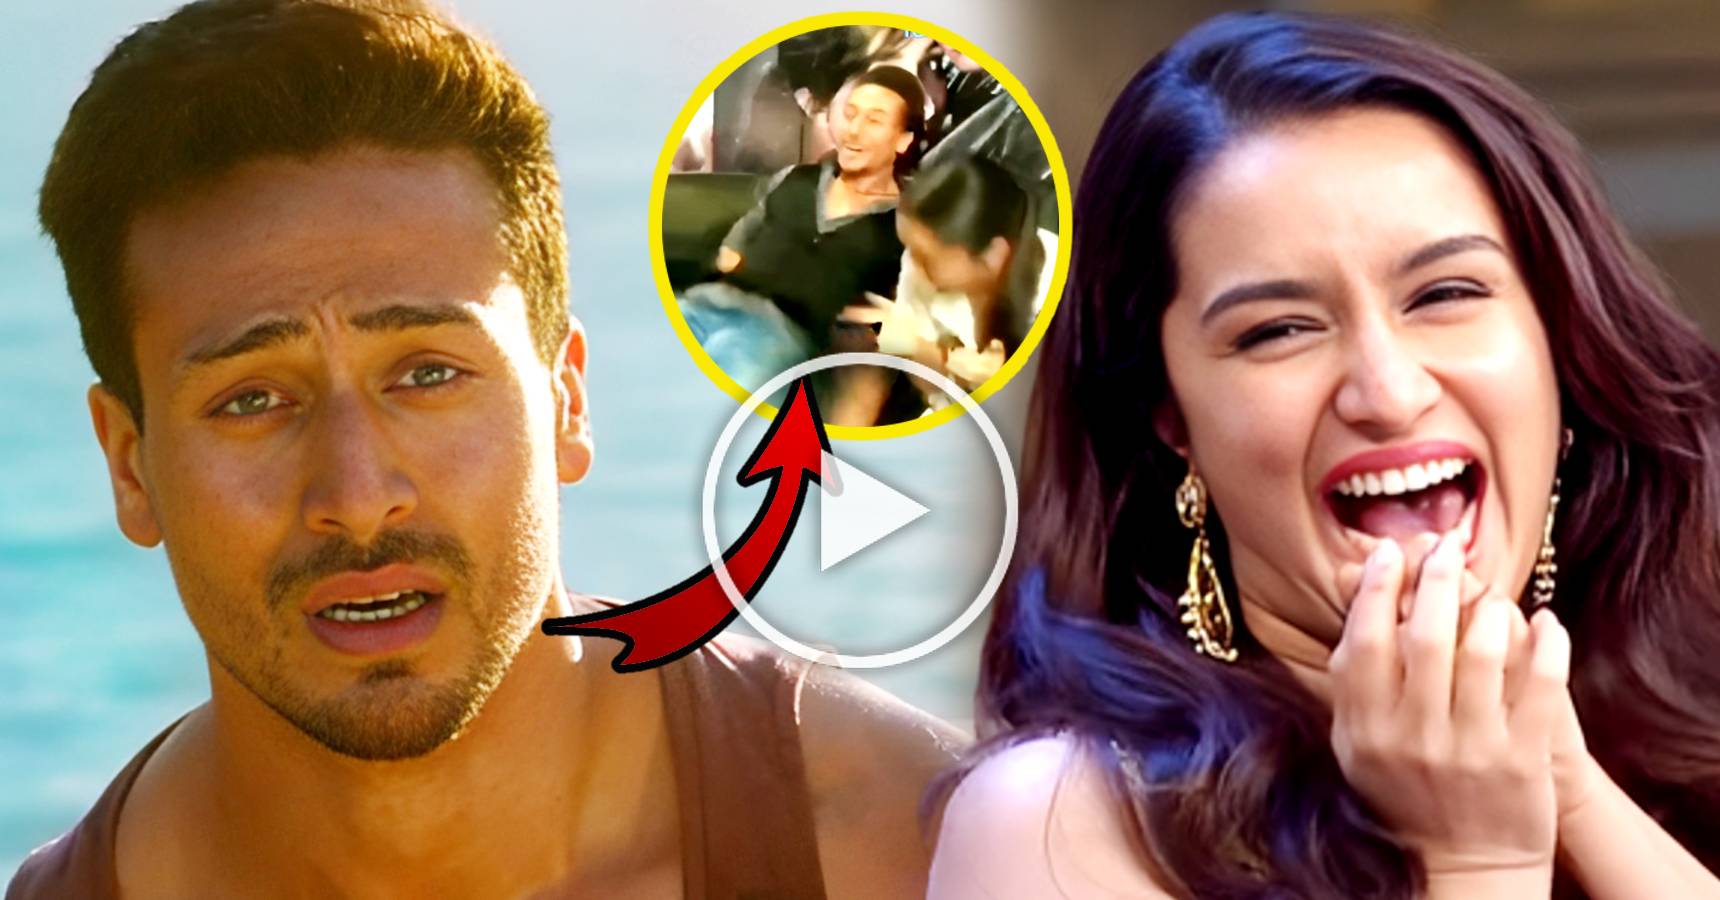 When Bollywood actor Tiger Shroff farted in front of Shraddha Kapoor video goes viral